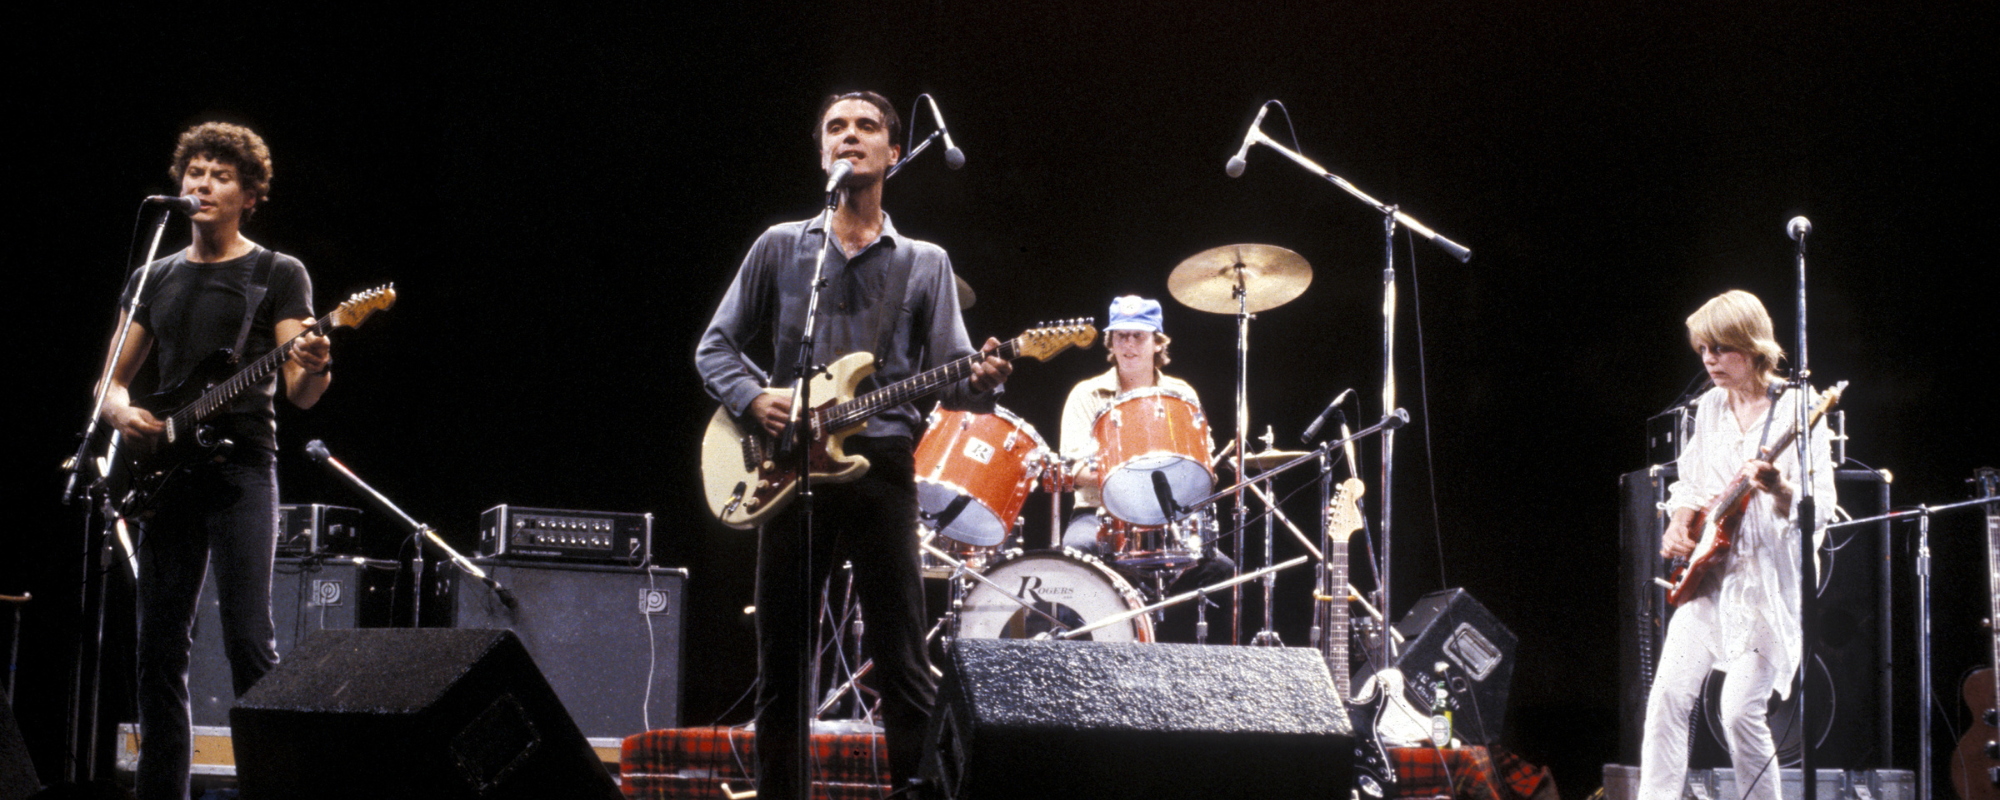 Rejecting Legends! Legends Rejecting Them! 5 Fascinating Facts About Talking Heads